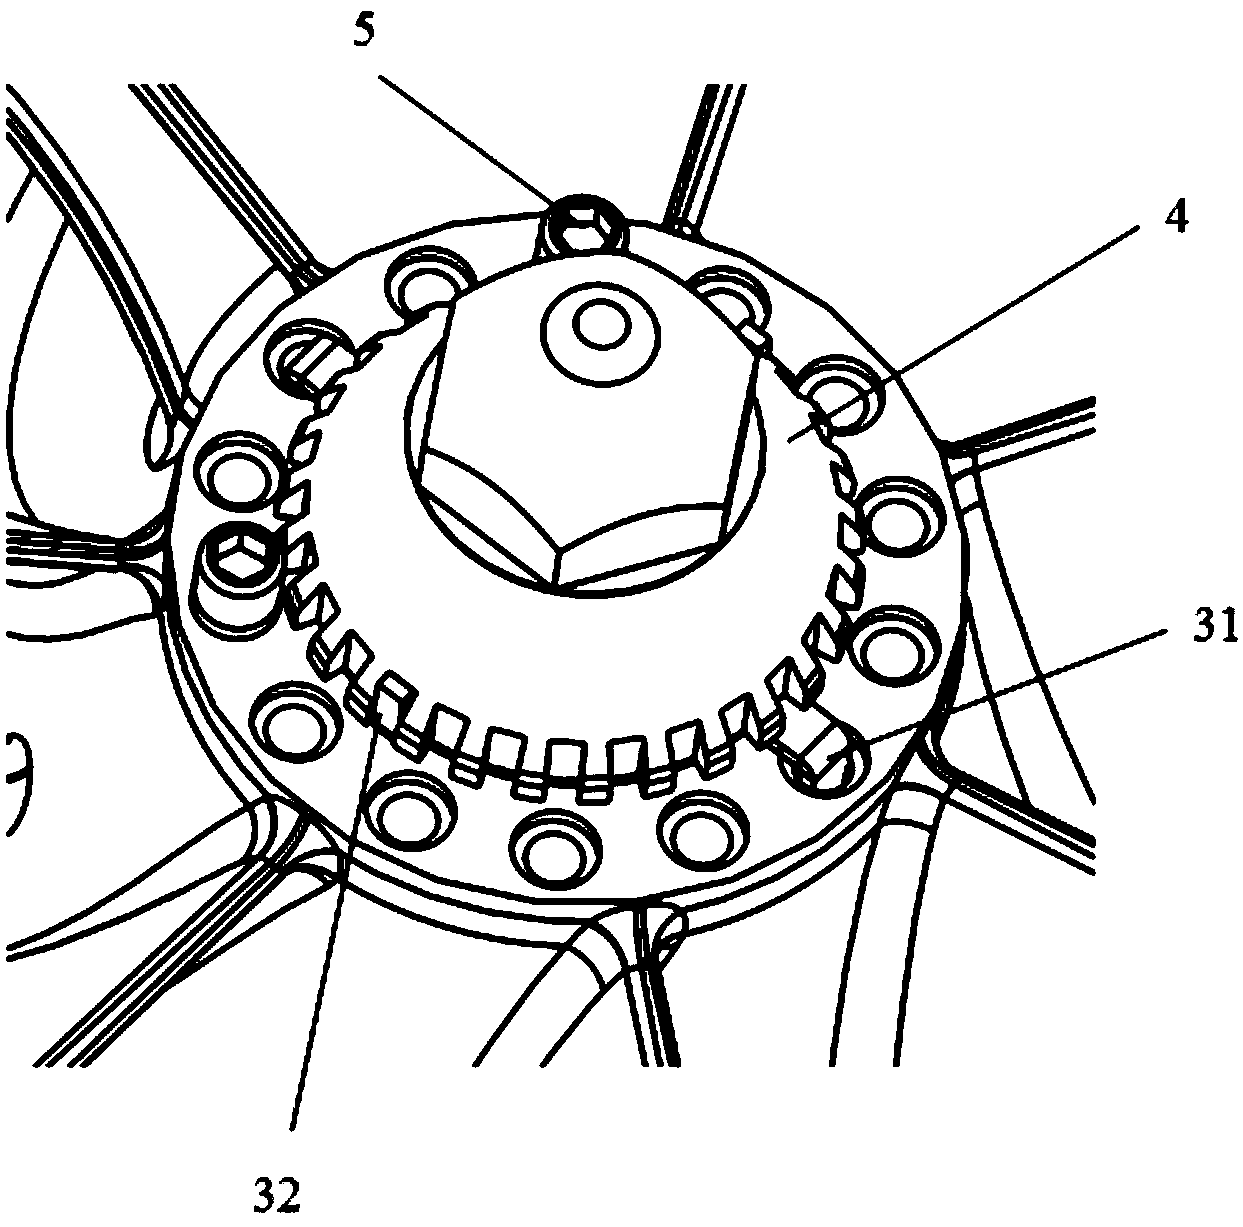 Air guide impeller assembly of centrifugal blower